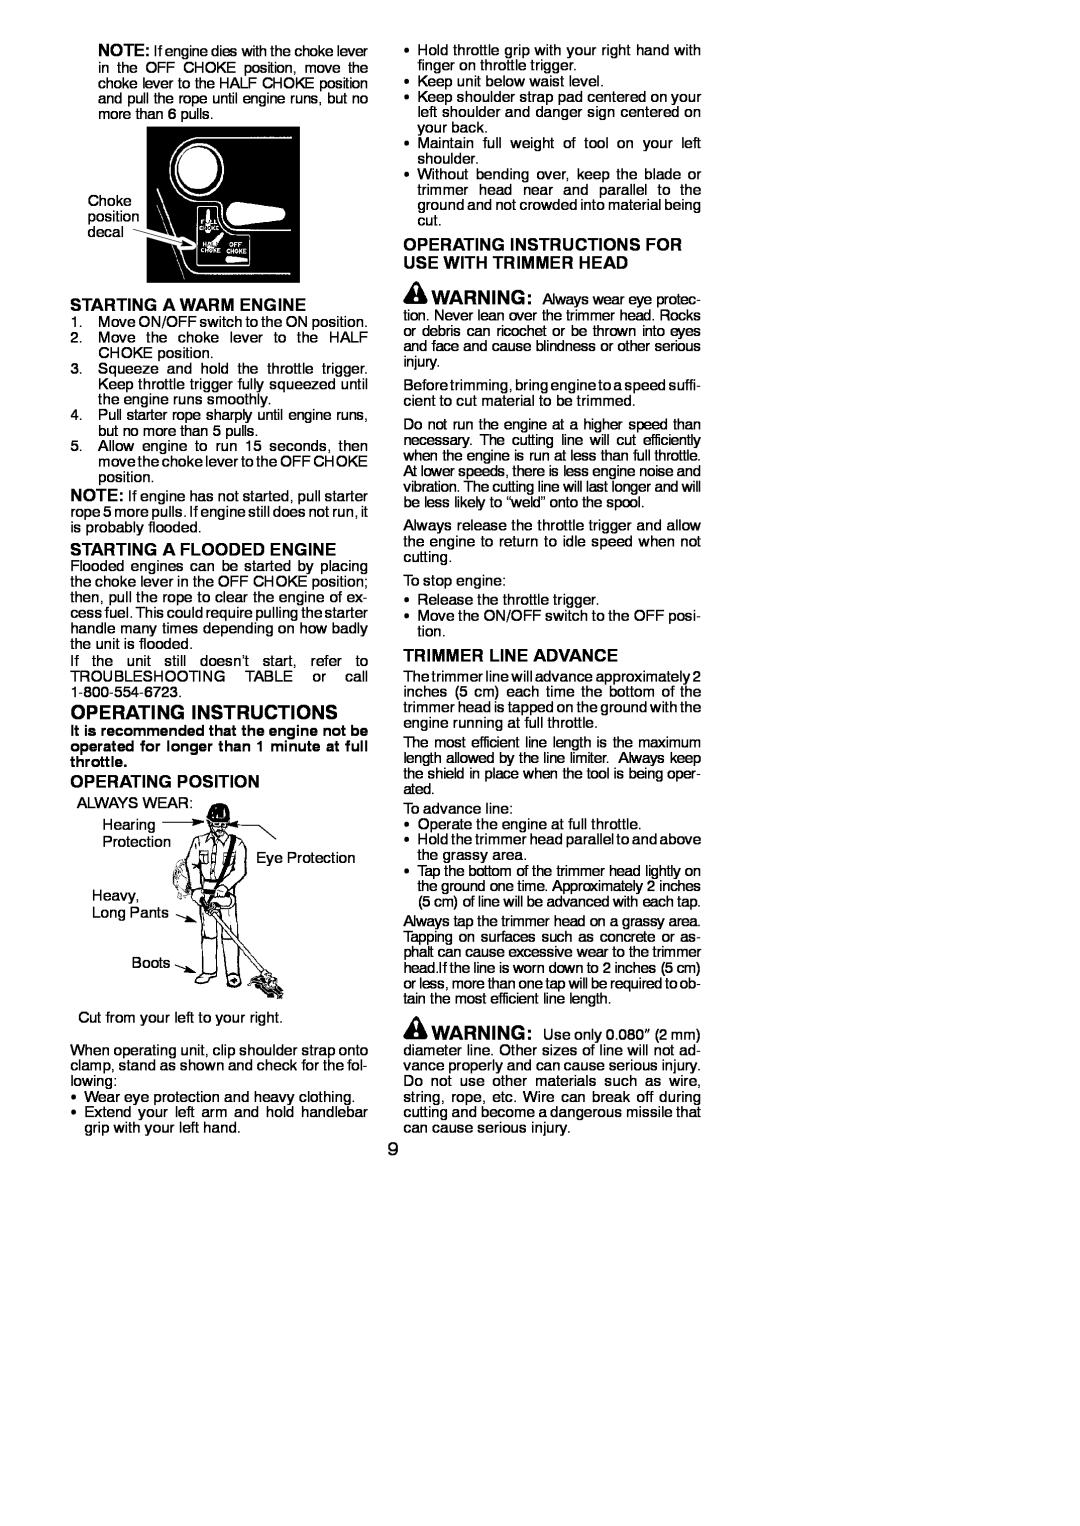 Weed Eater 530165748-01 Operating Instructions, Starting A Warm Engine, Starting A Flooded Engine, Operating Position 